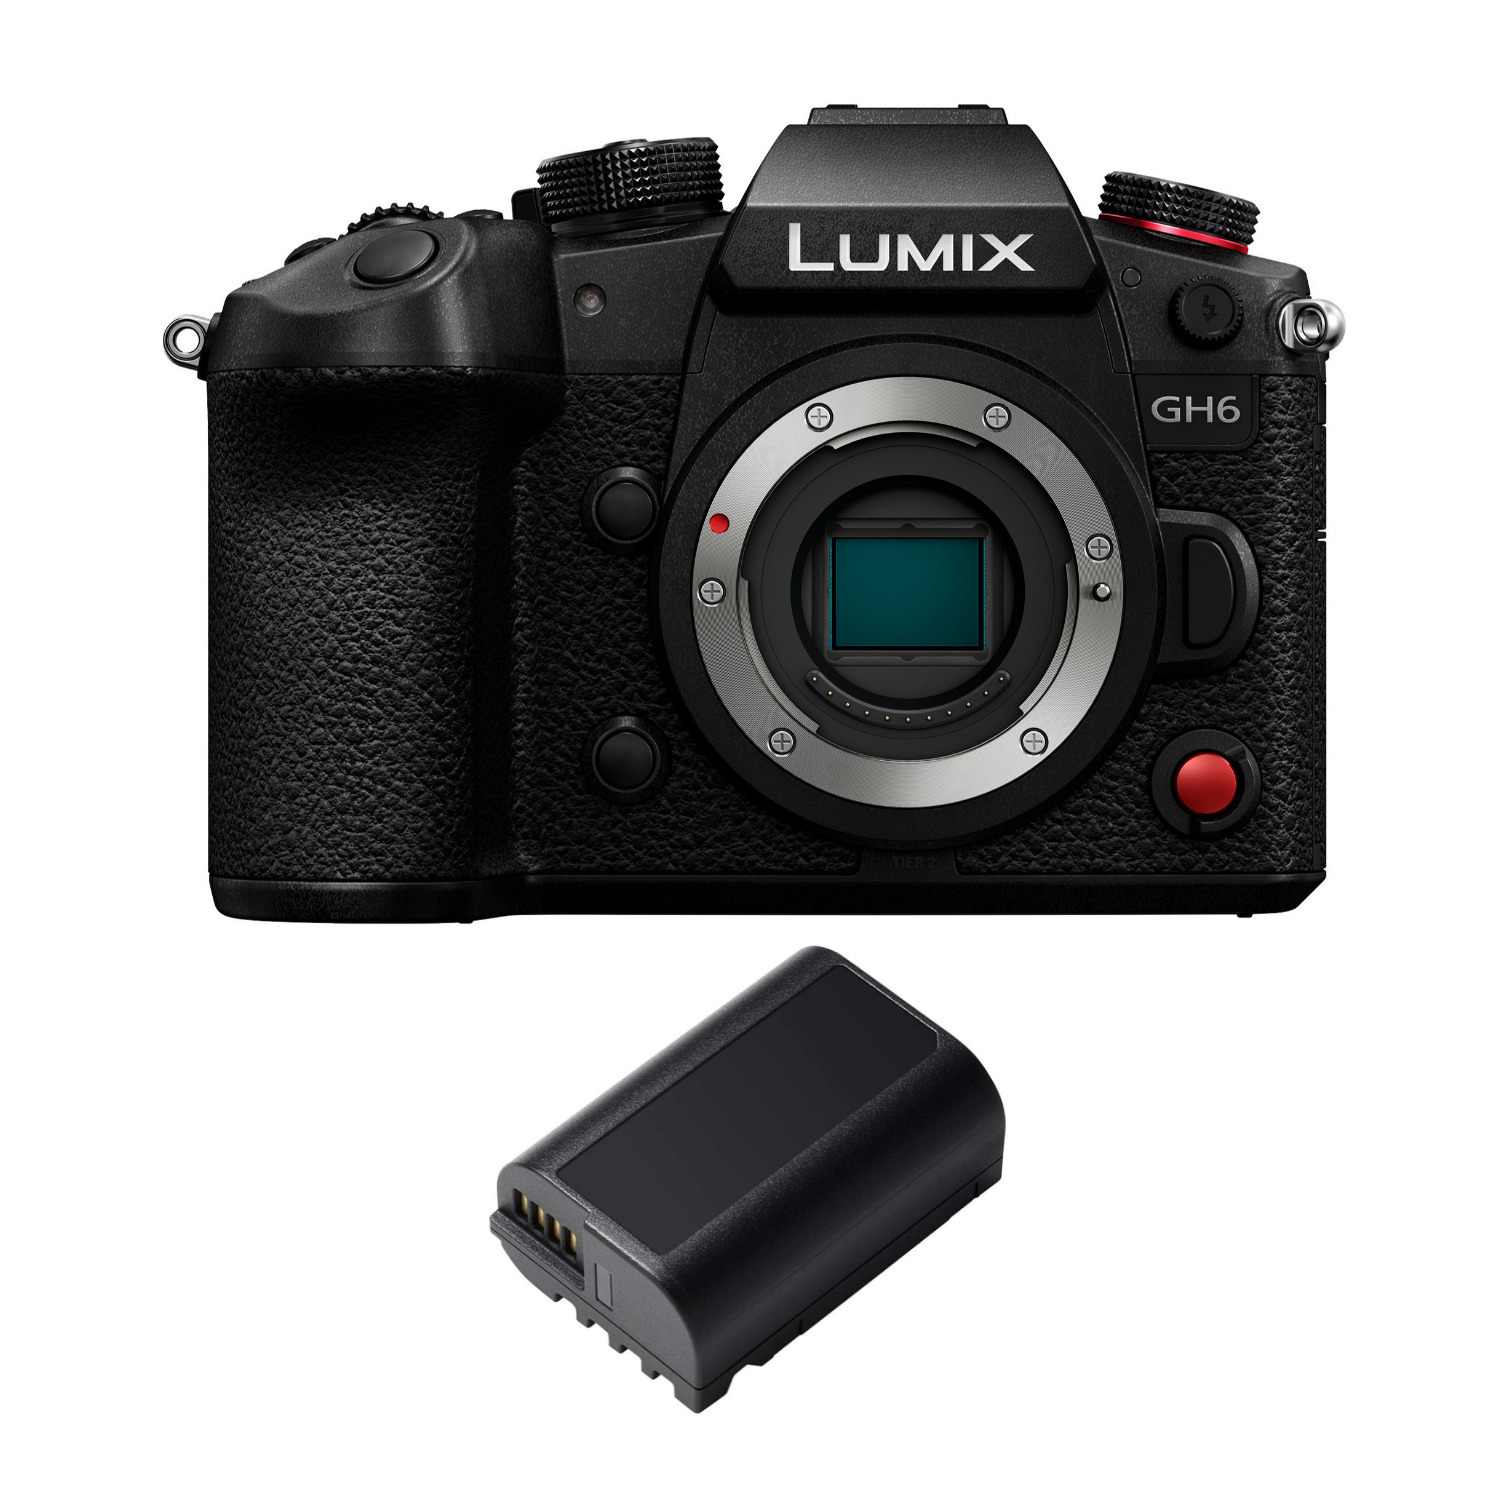 Panasonic LUMIX GH6 Mirrorless Camera Body with DMW-BLK22 Battery Pack in Black